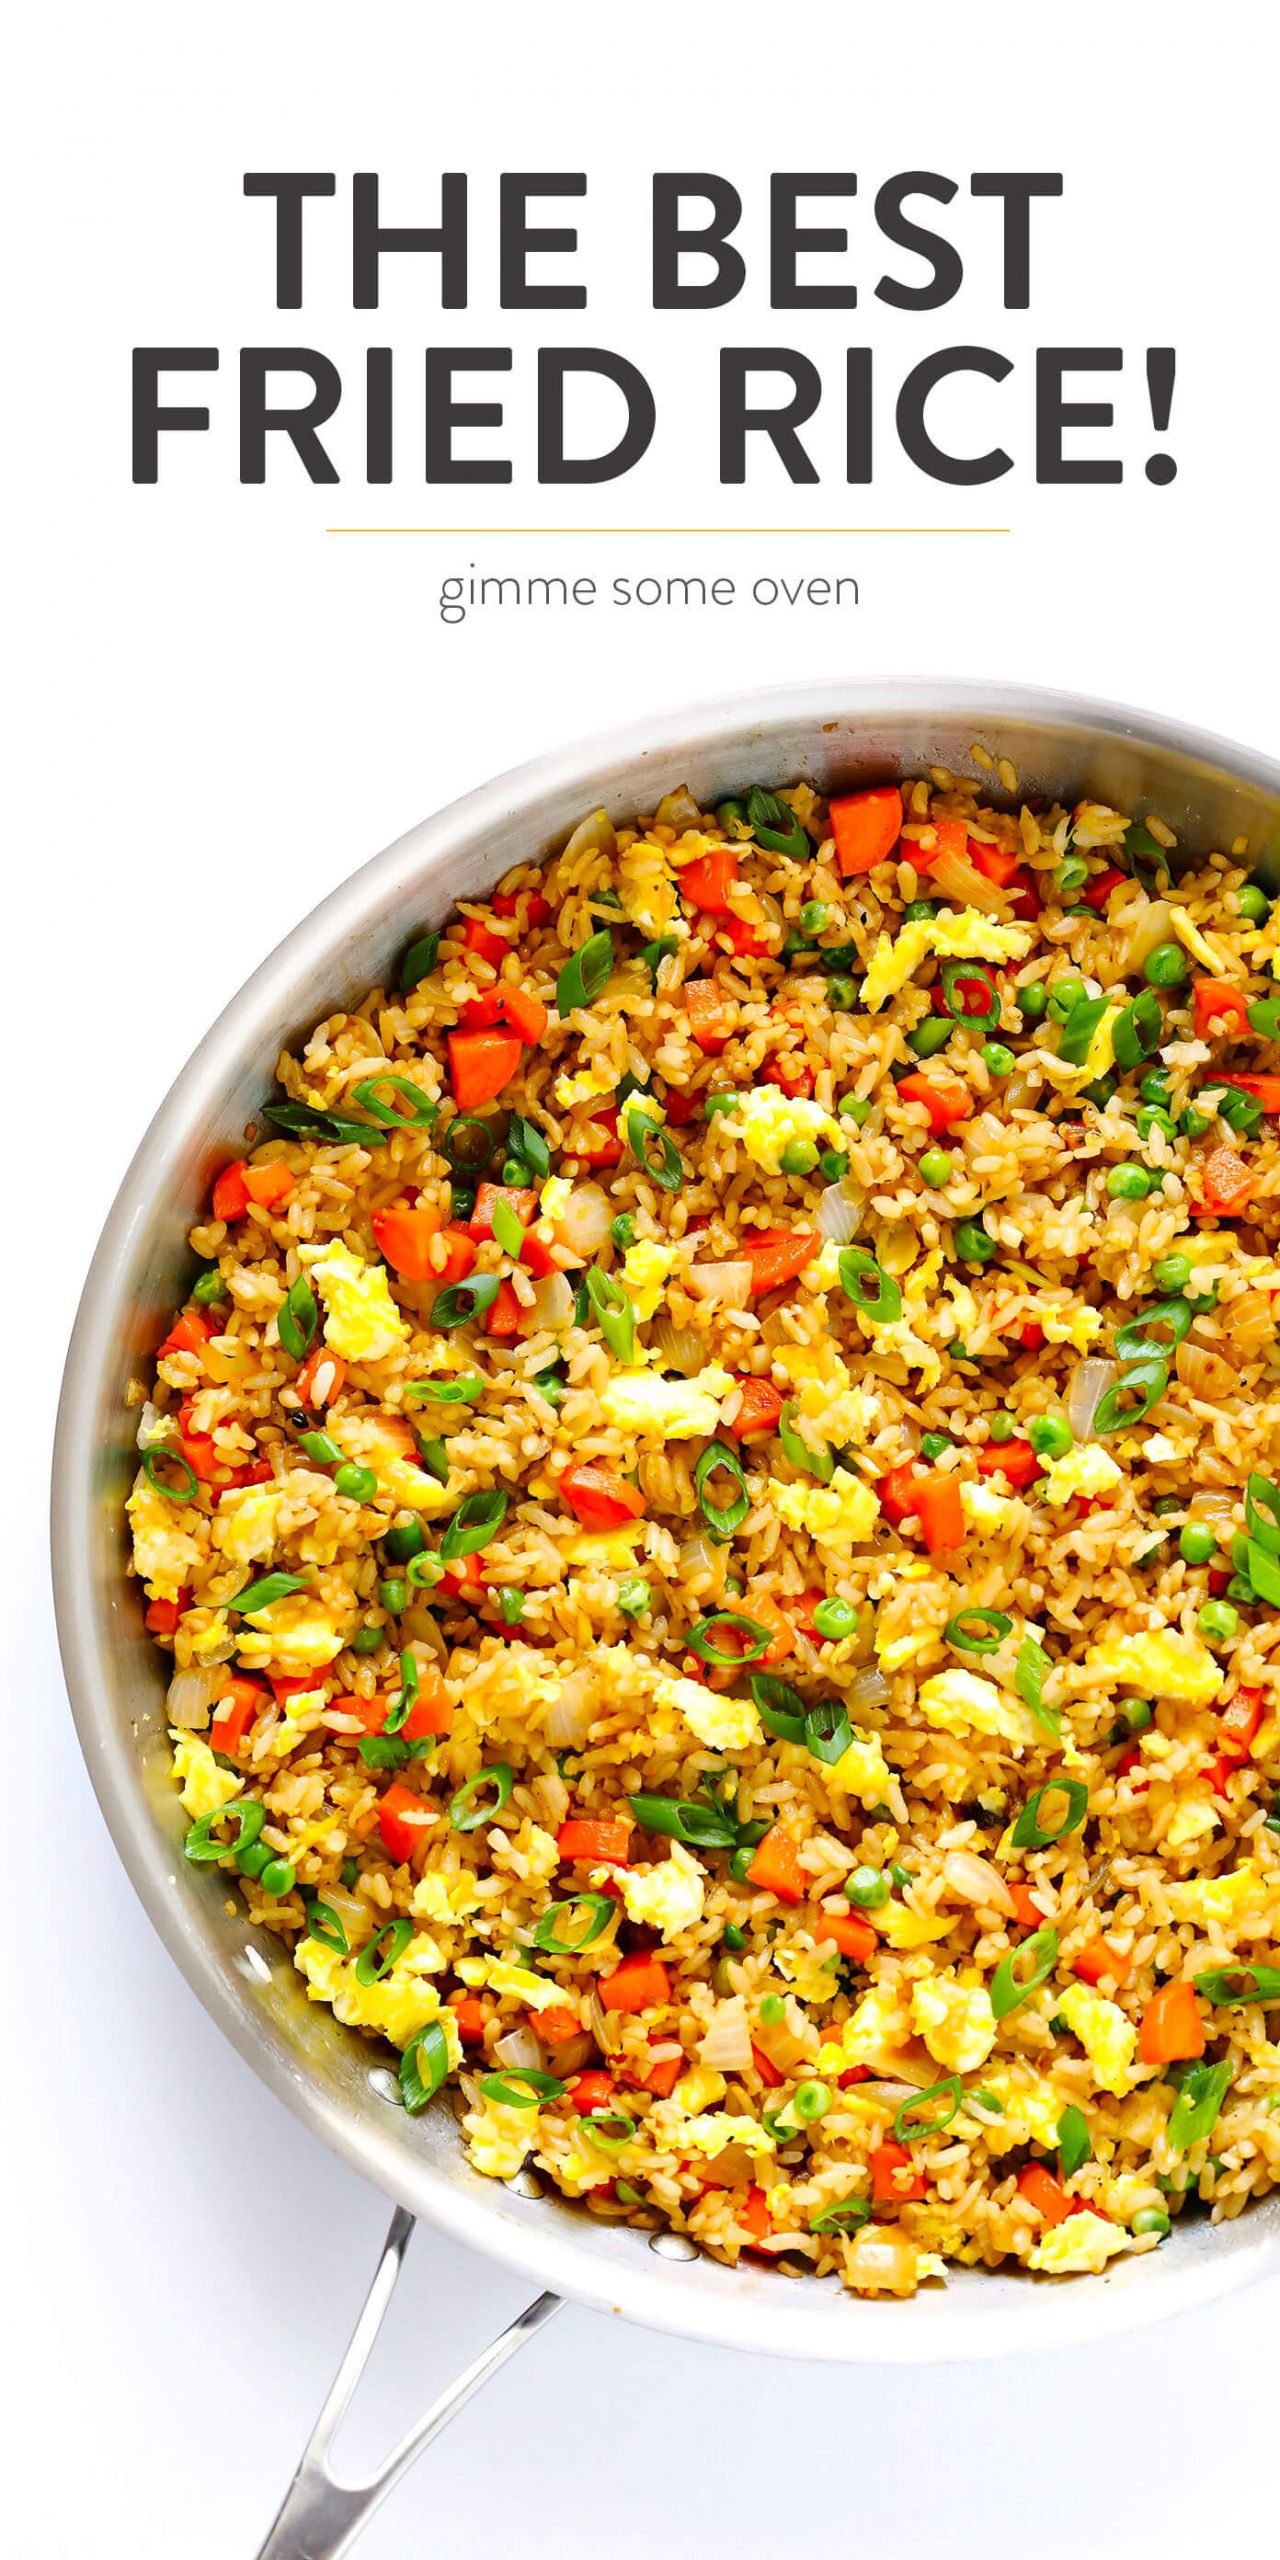 Chinese Fried Rice Recipe Easy
 The BEST Fried Rice